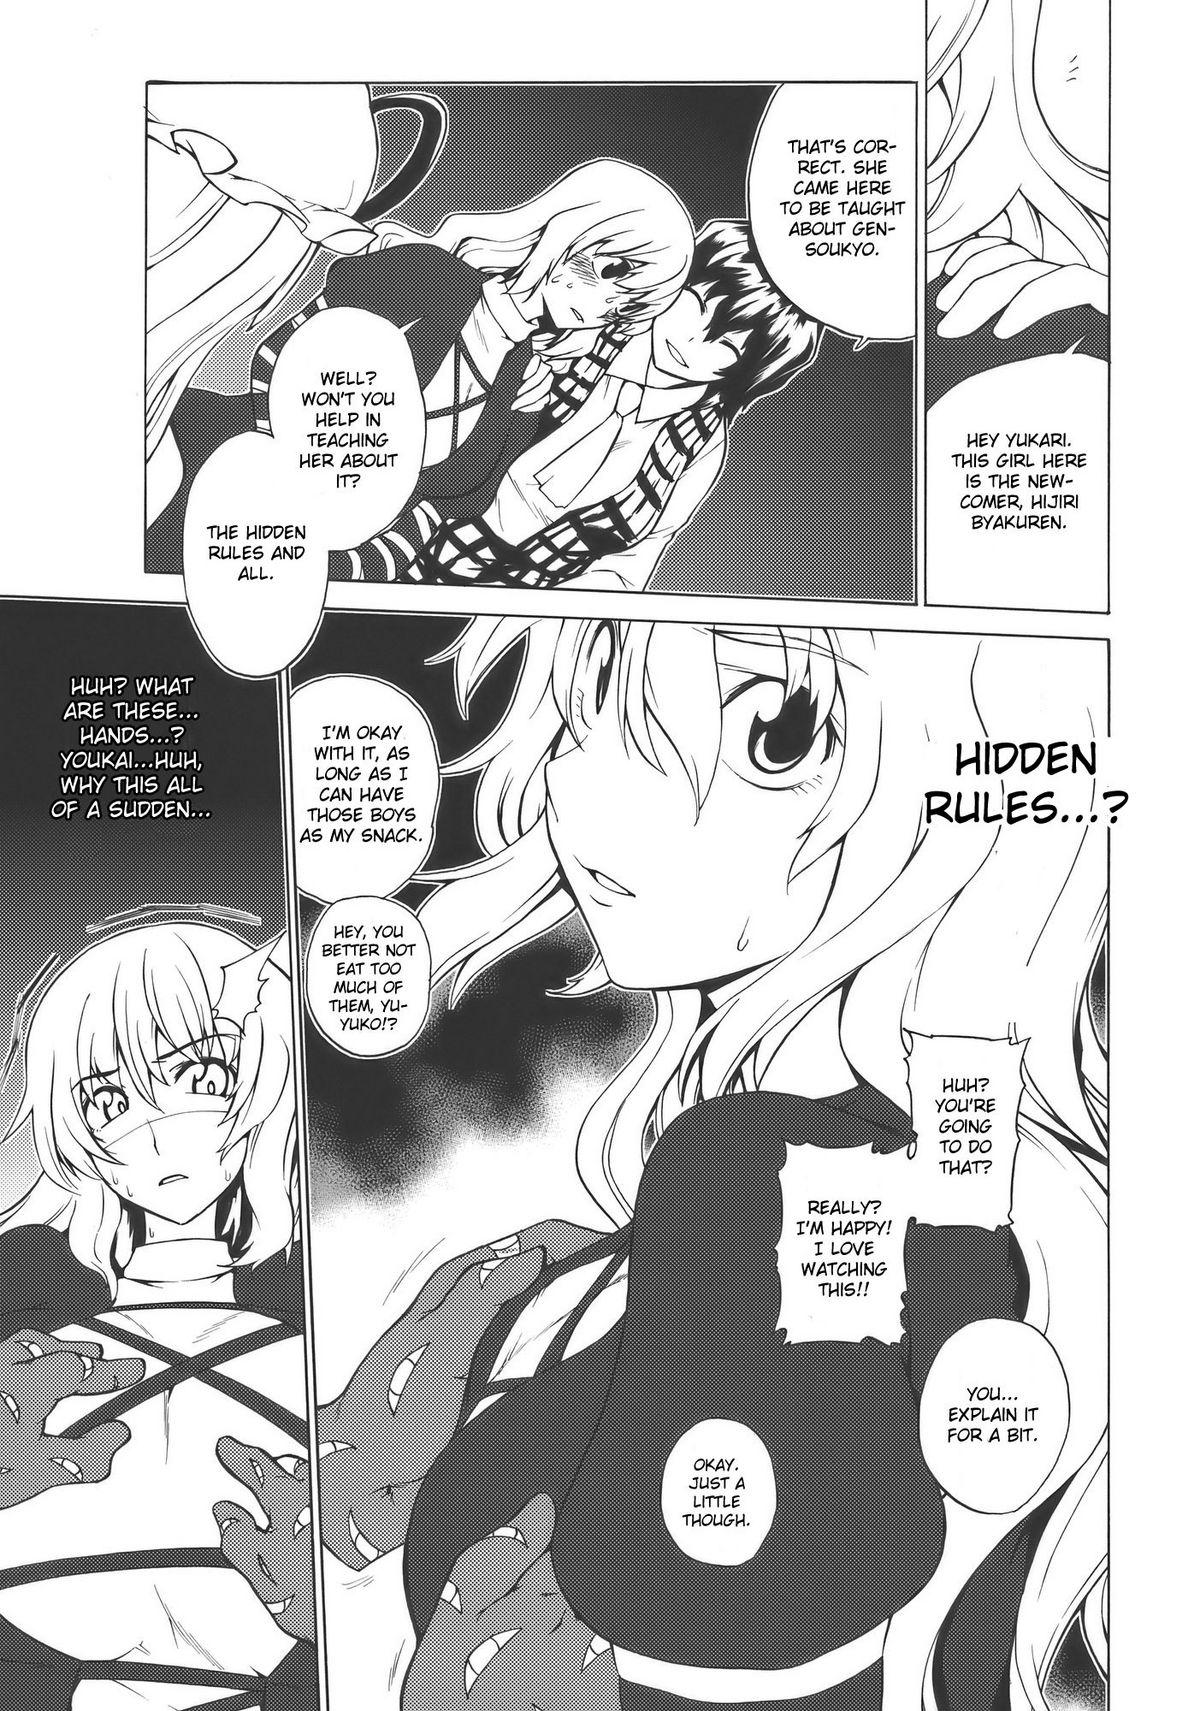 POV Playing Gensoukyou Now - Touhou project Swinger - Page 9